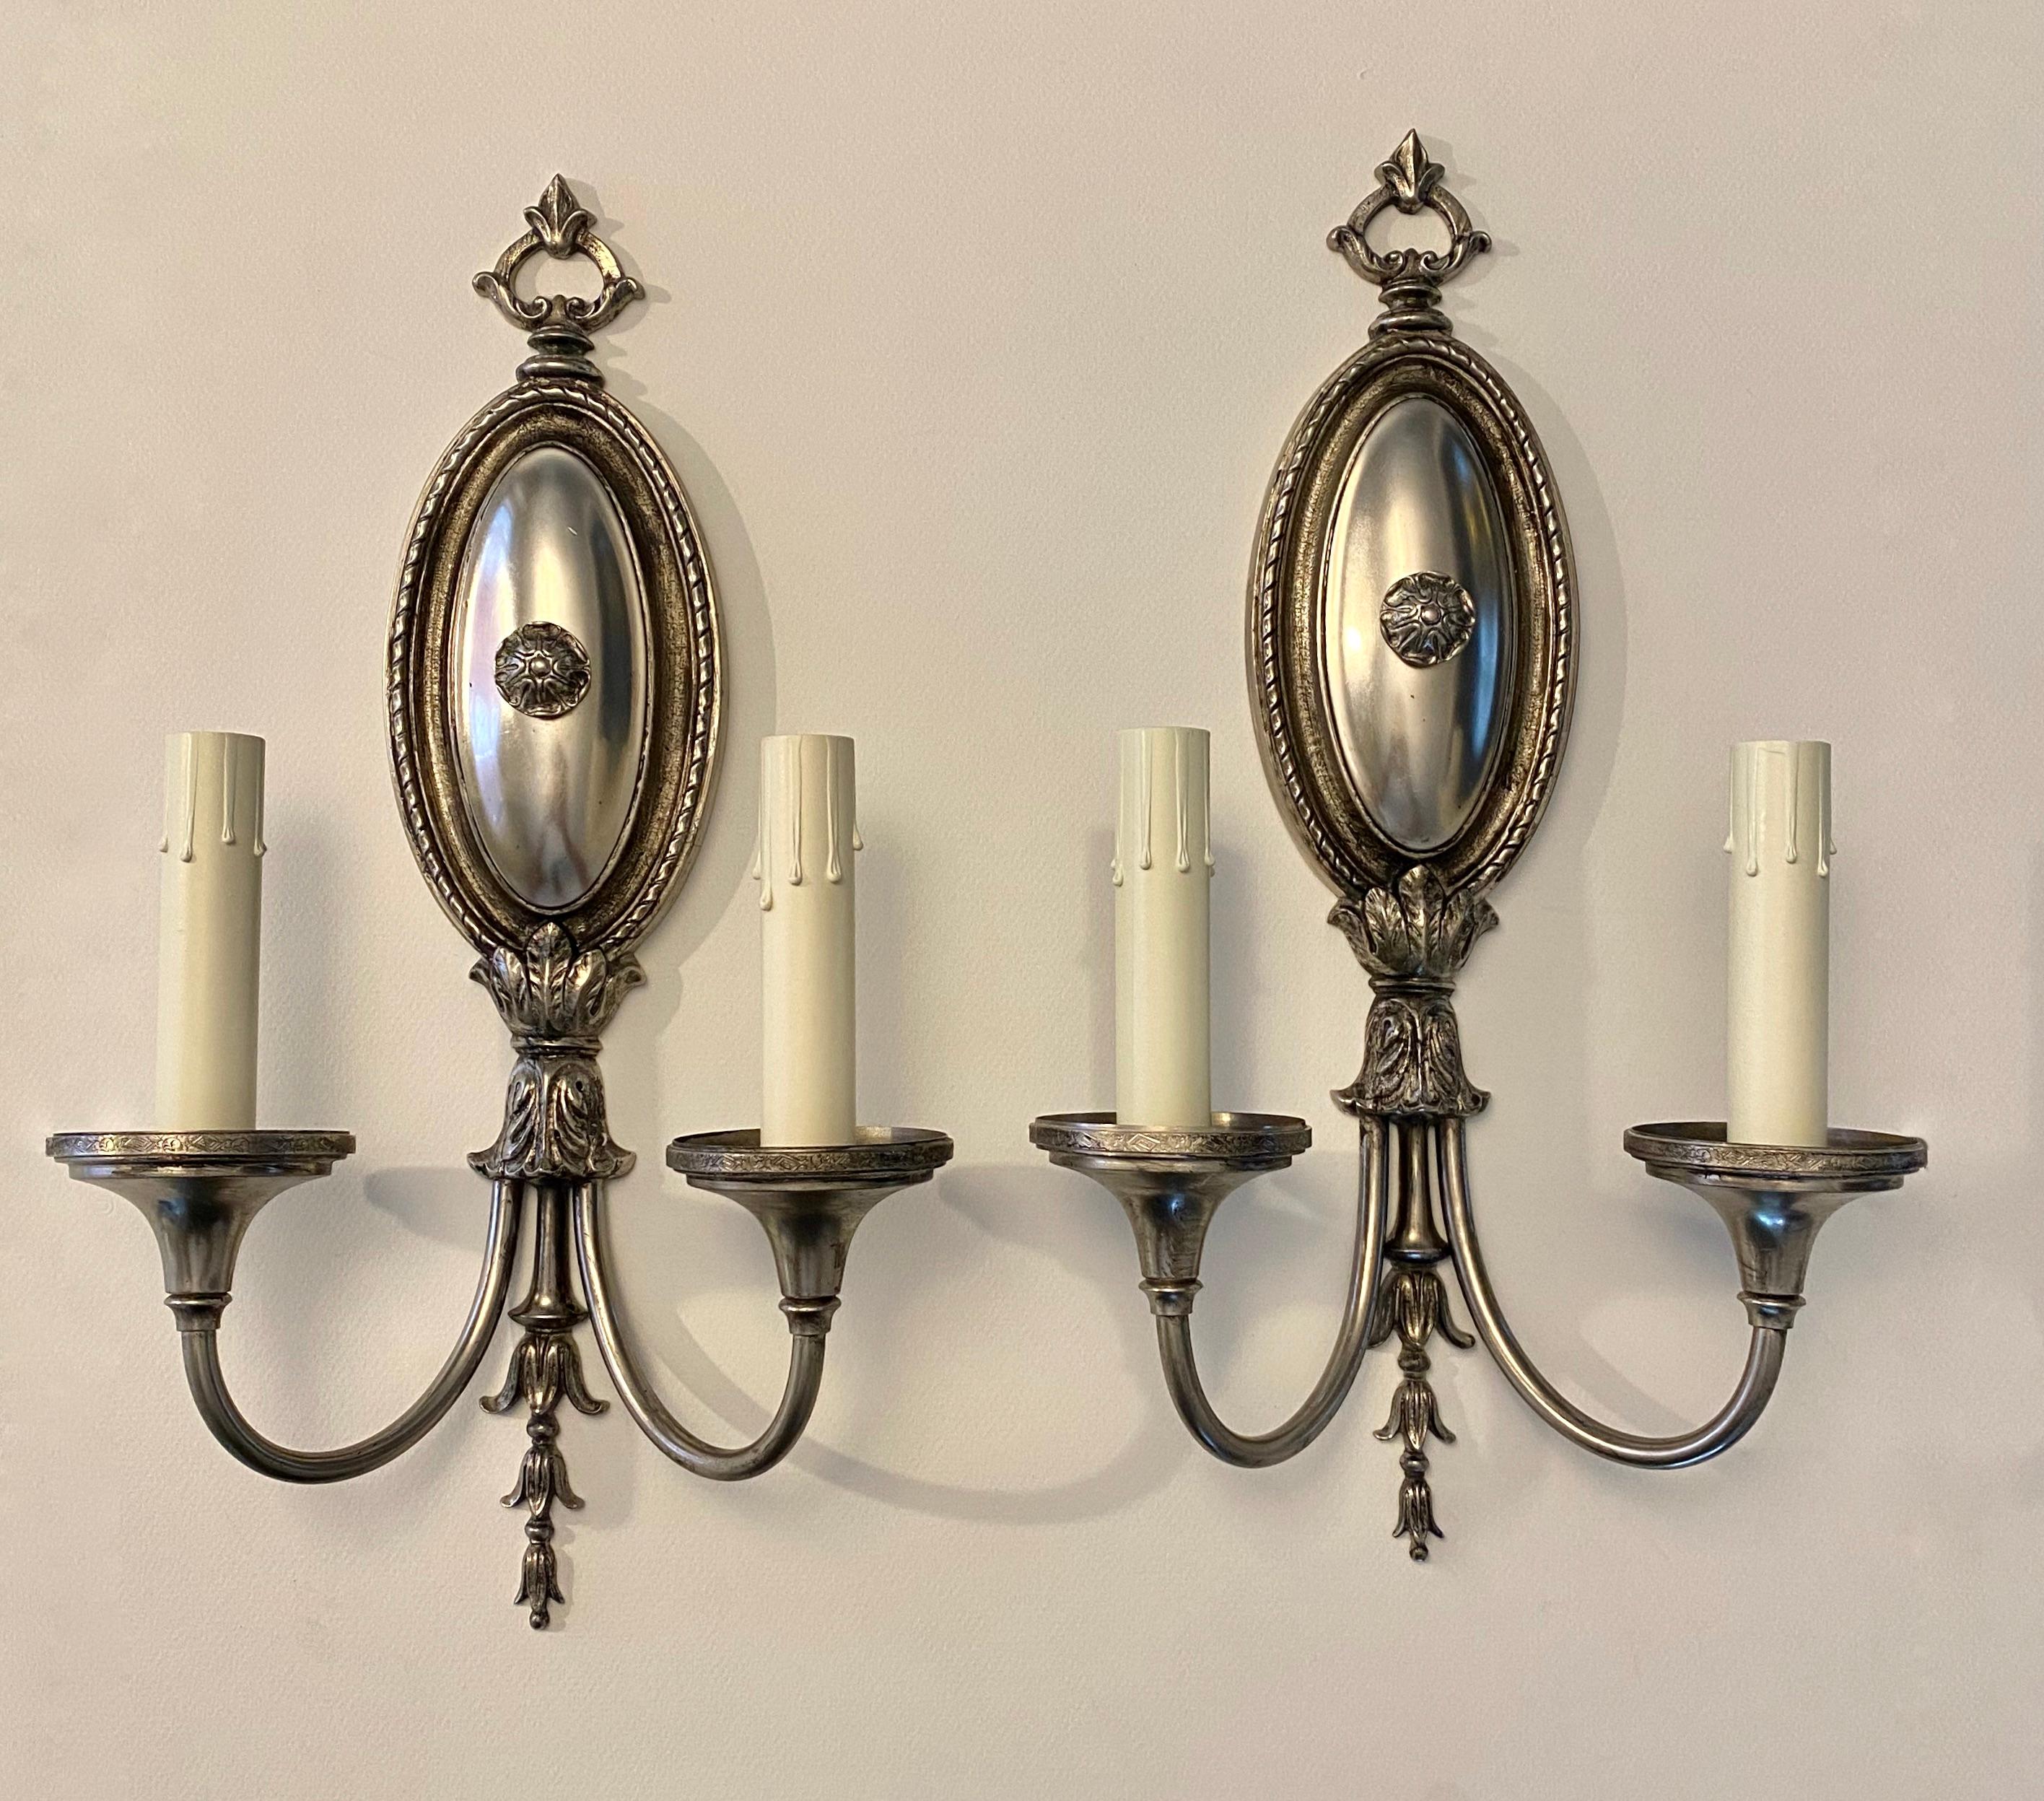 Pair of Adam style two-arm wall sconces attributed to Sterling Bronze Company, New York in an antiqued nickel finish. Beautiful scrolled acanthus leaves at arms and candle cups have a delicate incised pattern to edges. Each sconce uses two